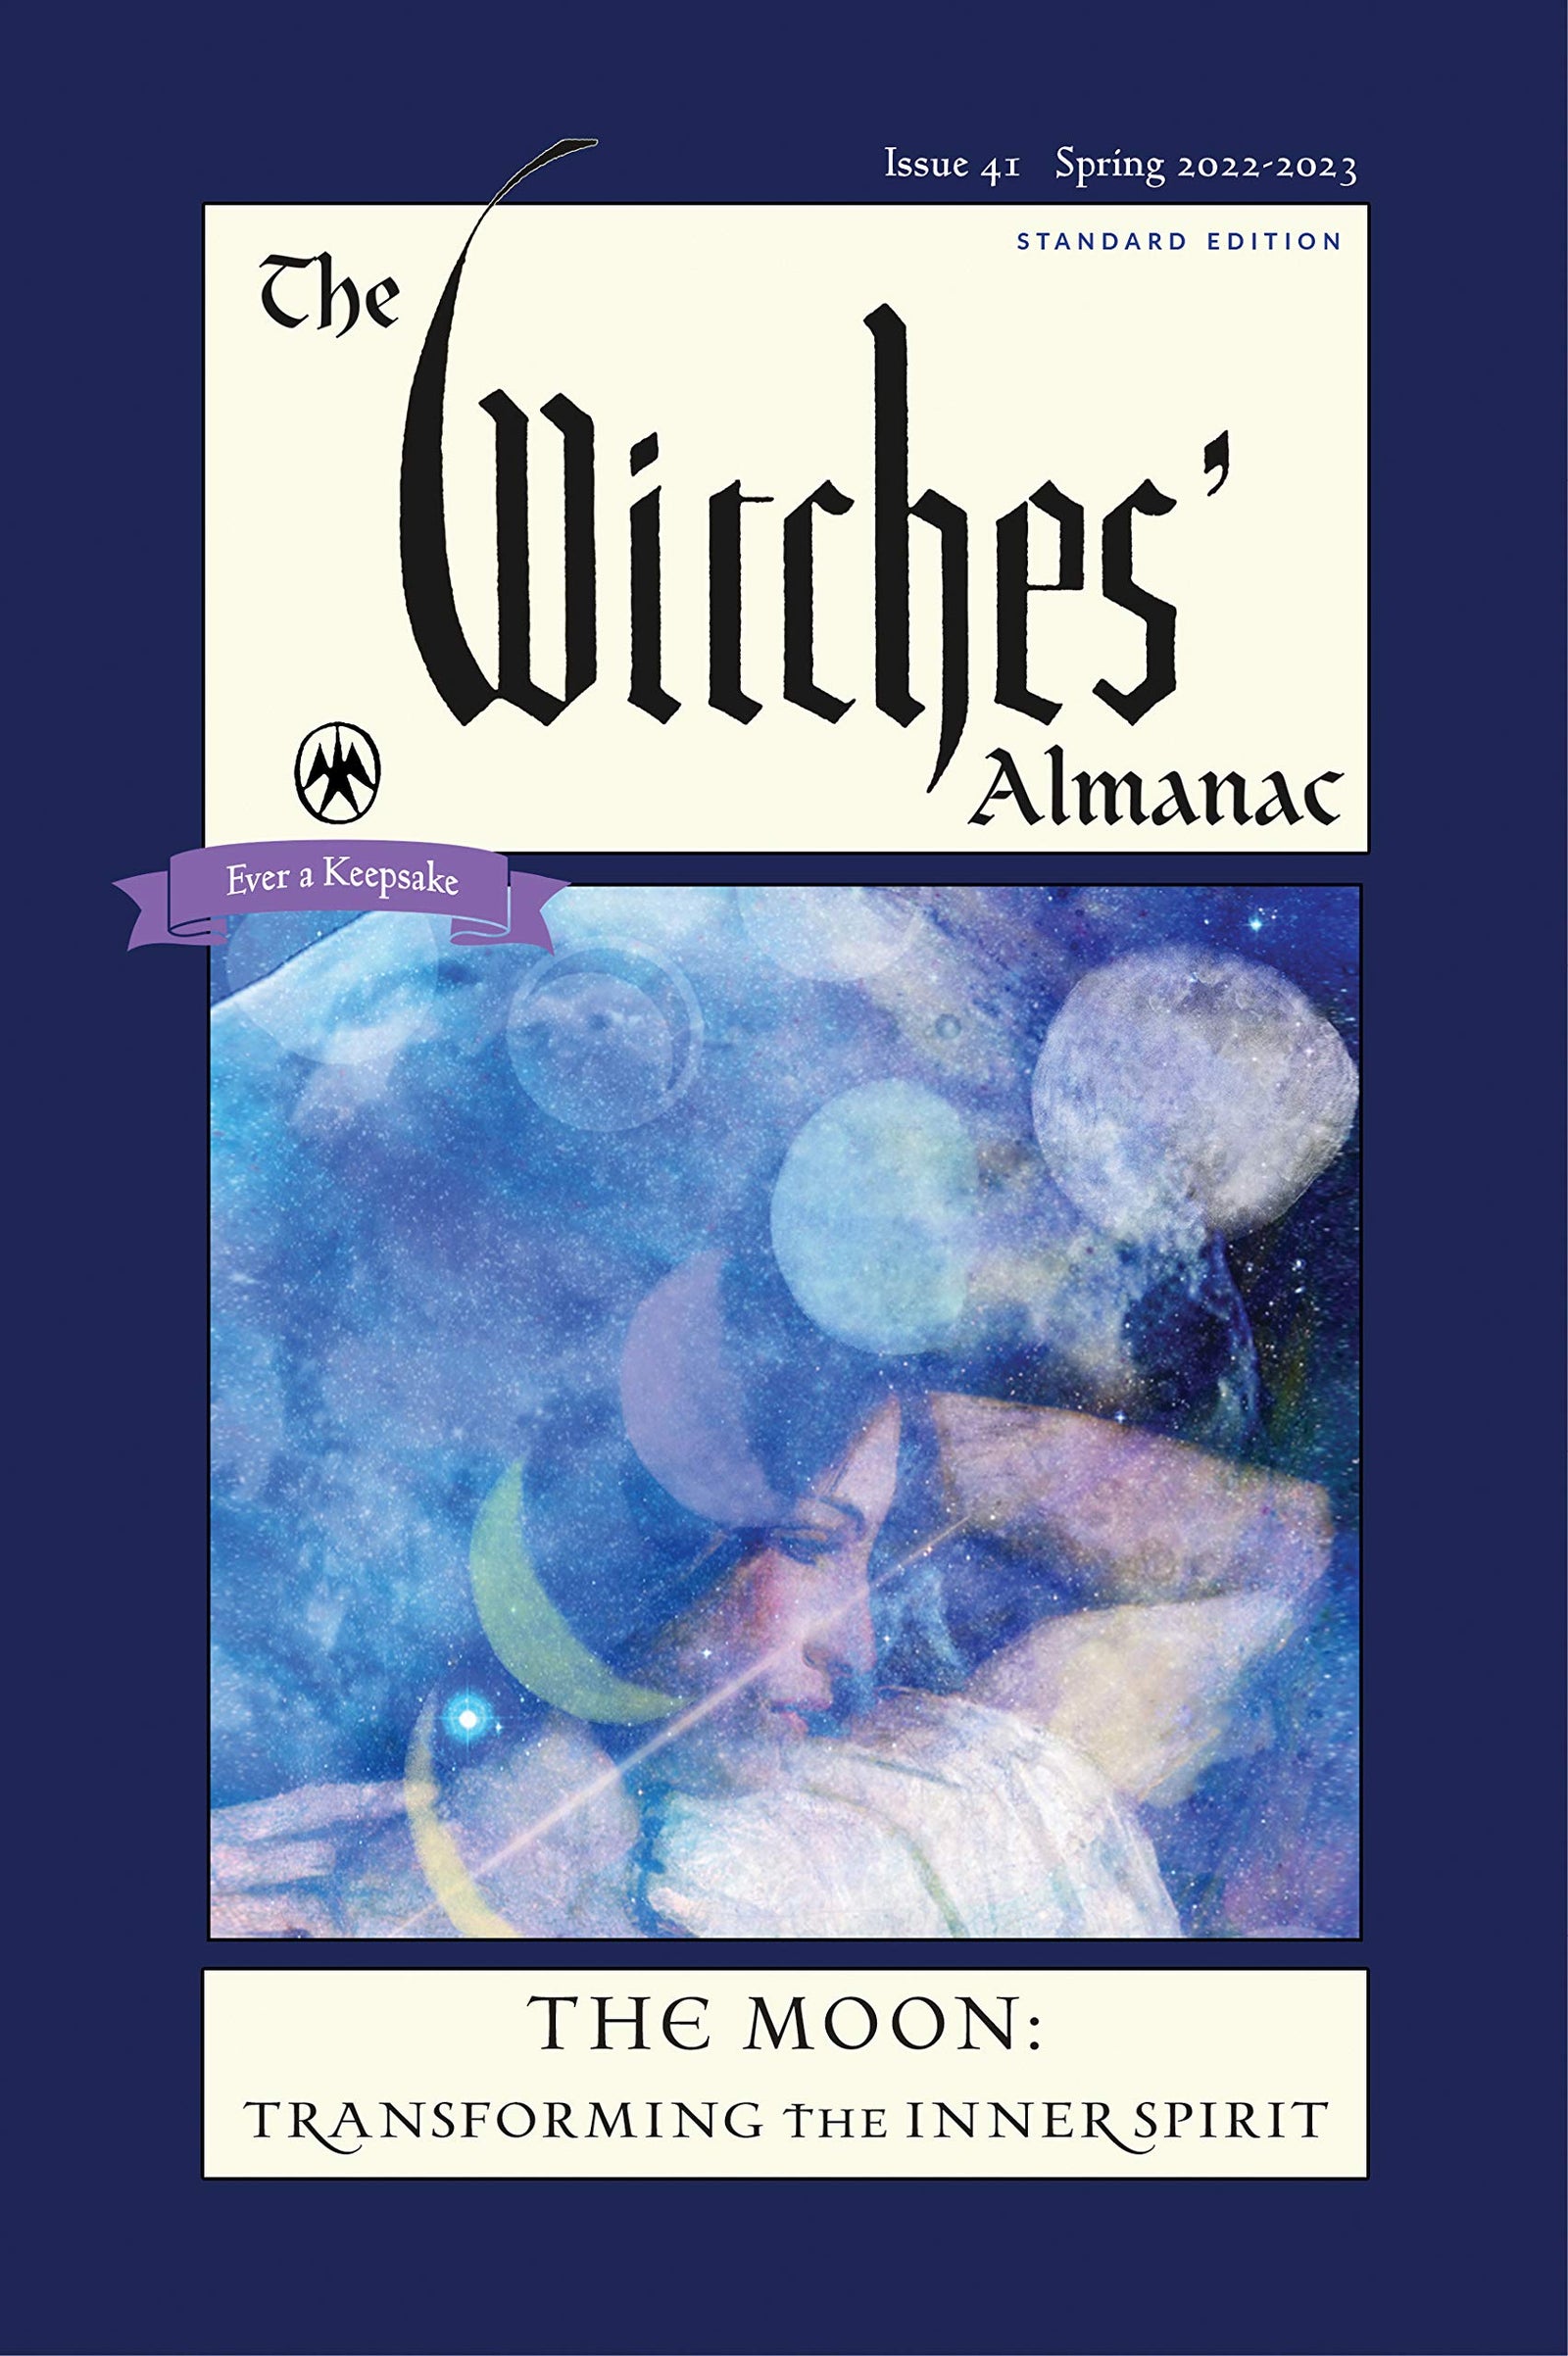 The Witches' Almanac 2022-2023 Standard Edition Issue 41: The Moon ― Transforming the Inner Spirit